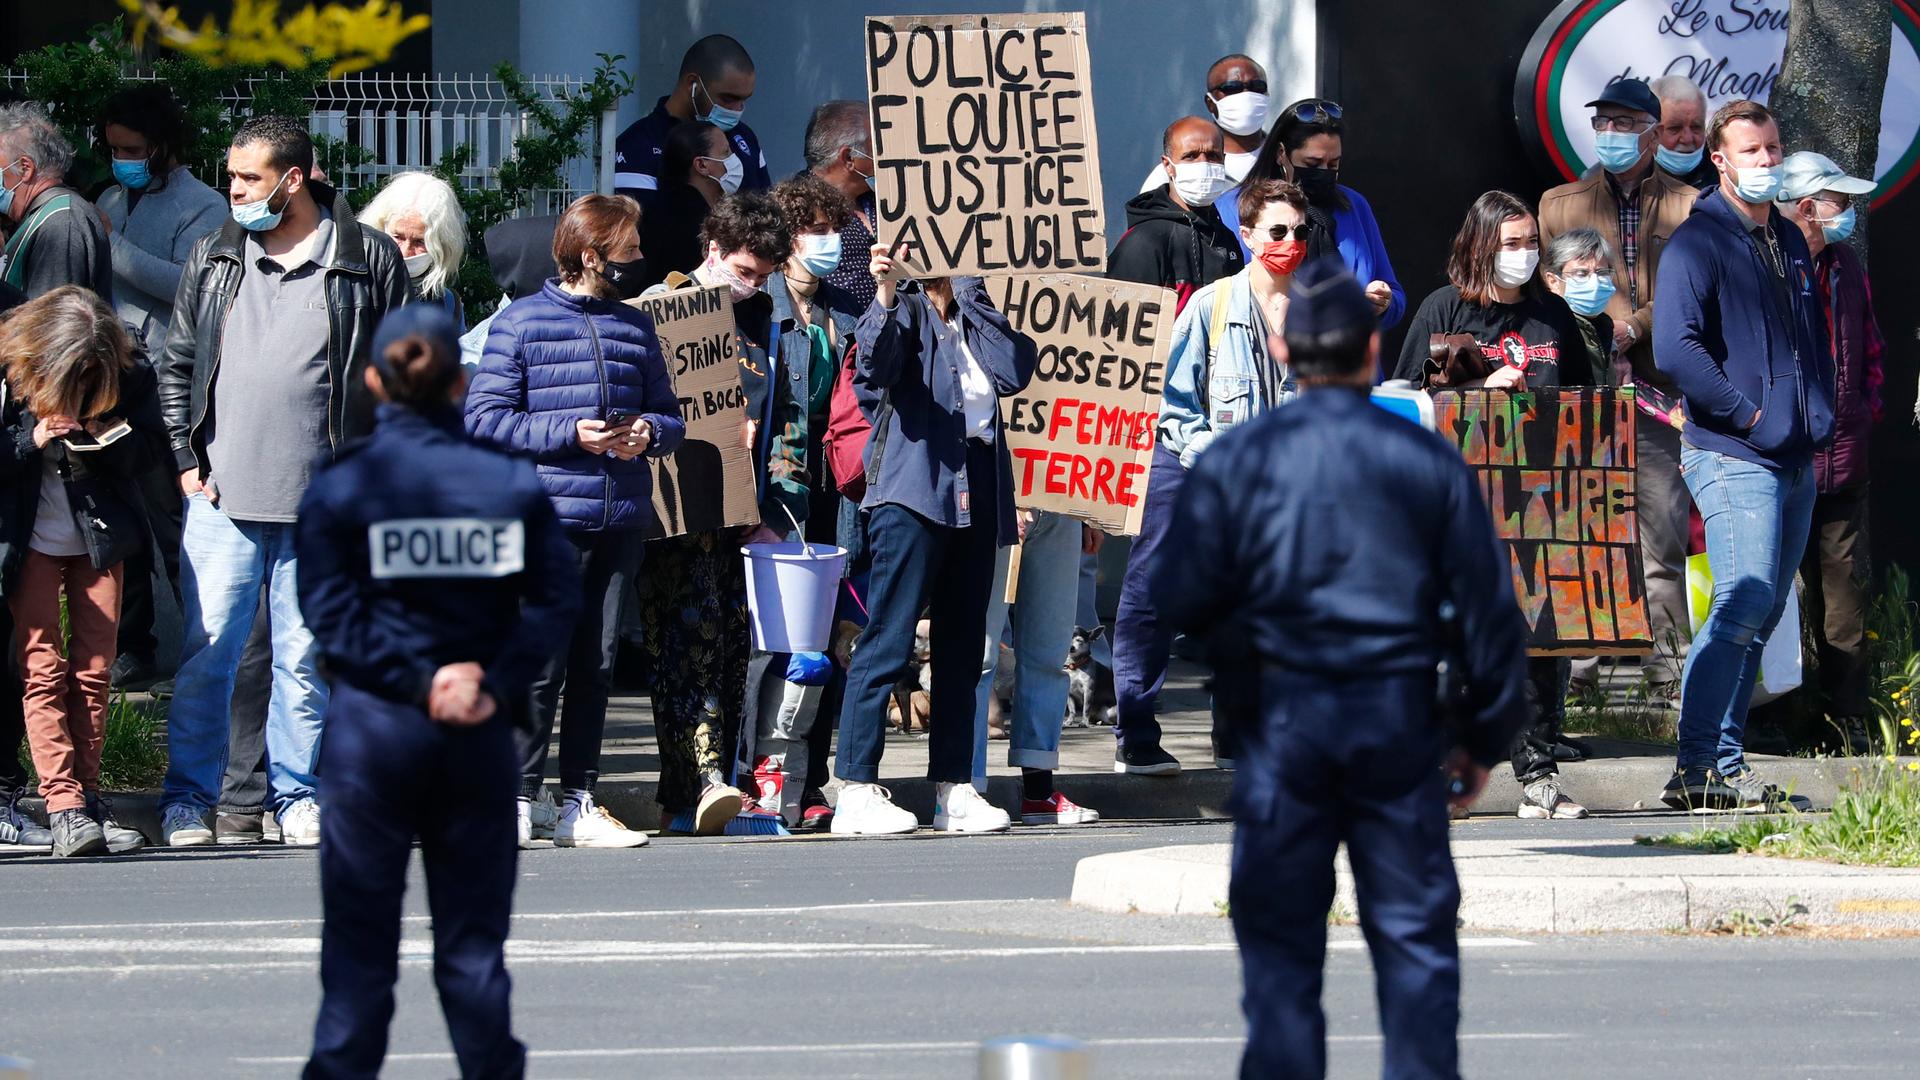 Two uniformed police stand before a crowd of protesters holding banners and signs